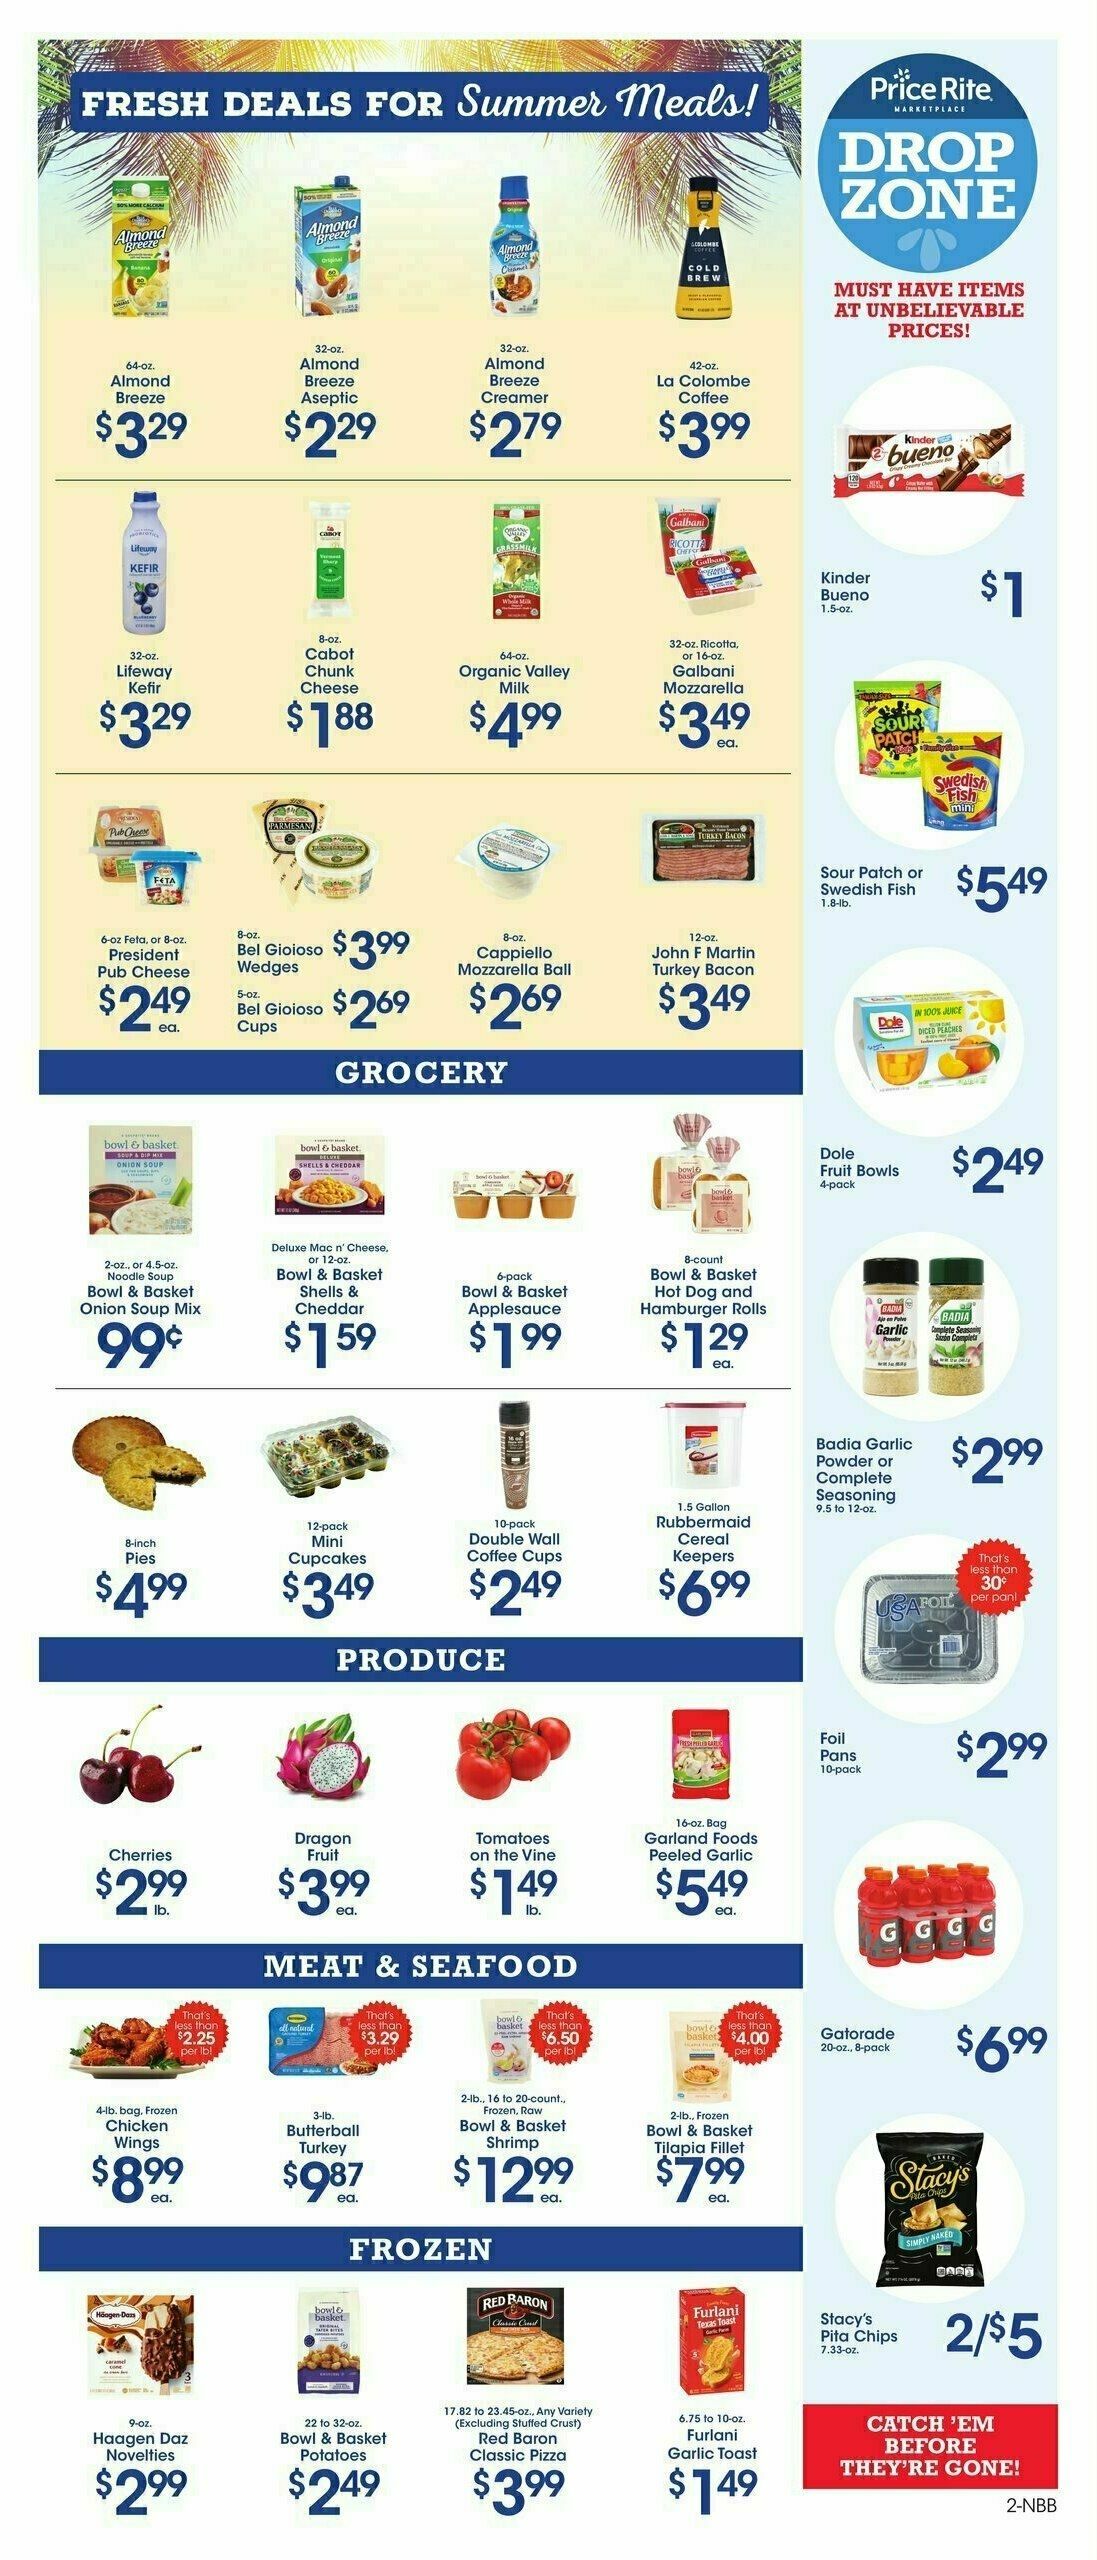 Price Rite Weekly Ad from July 28